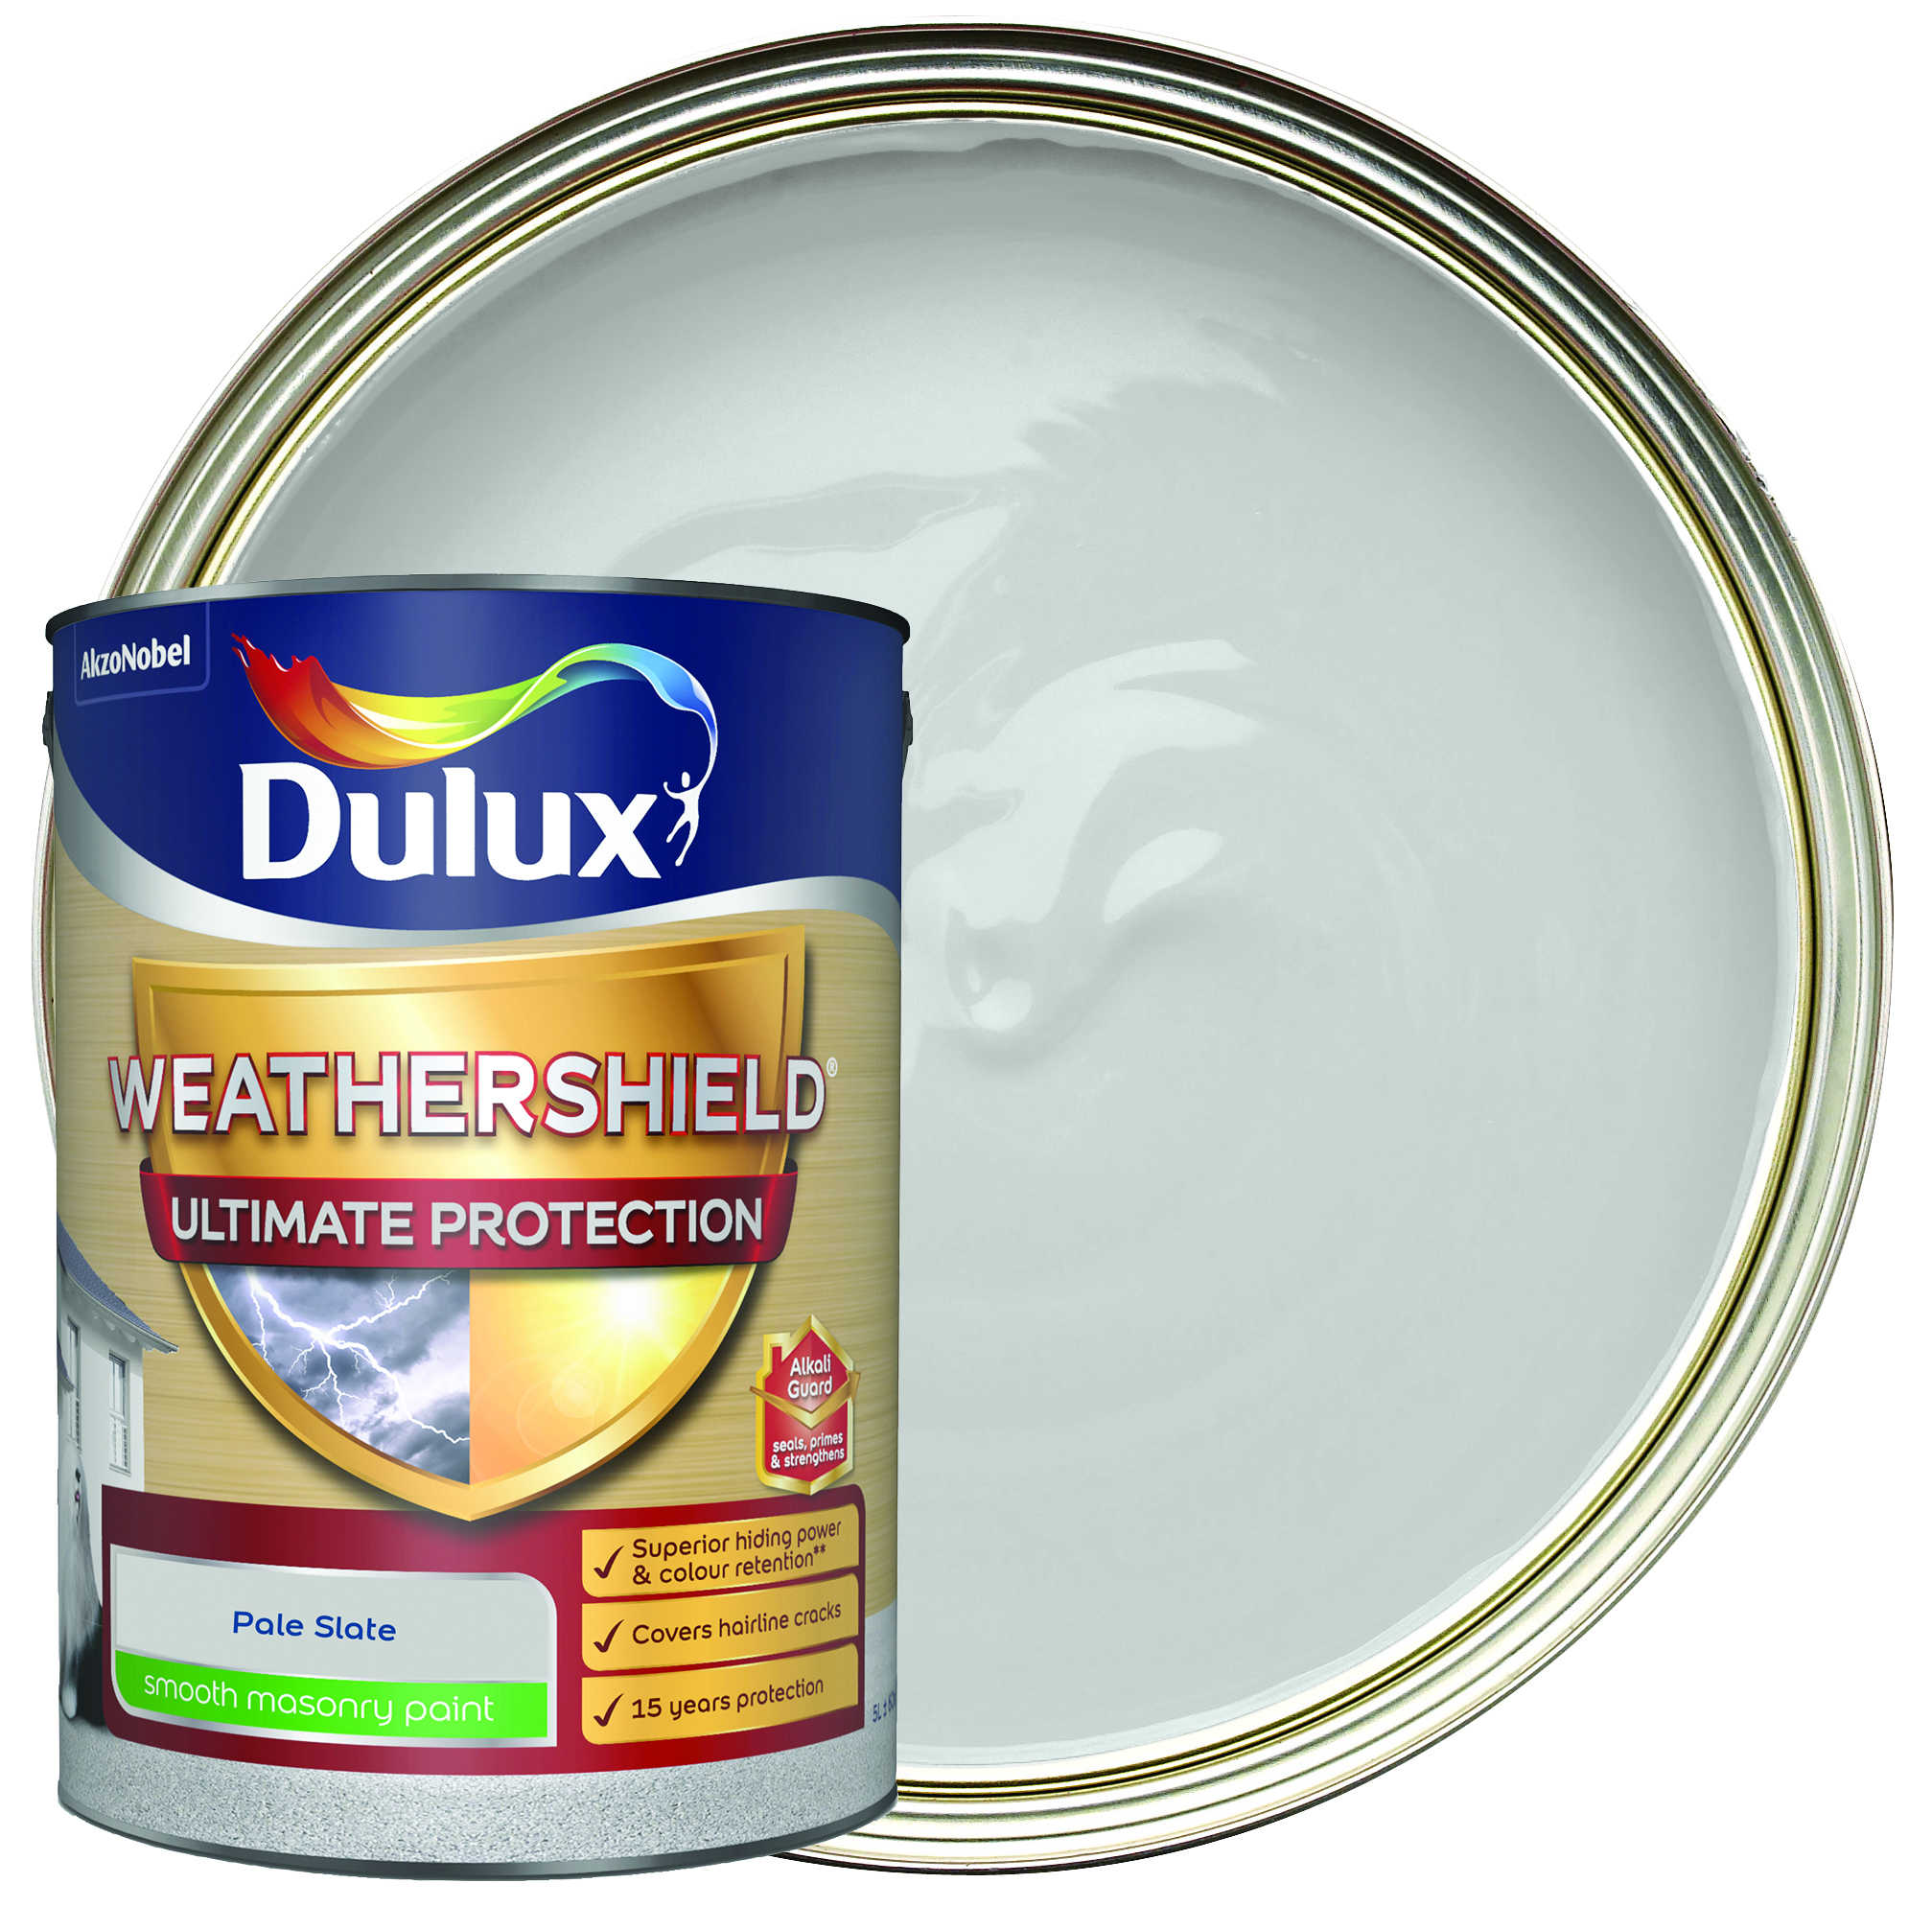 Image of Dulux Weathershield Ultimate Protect Paint - Pale Slate - 5L